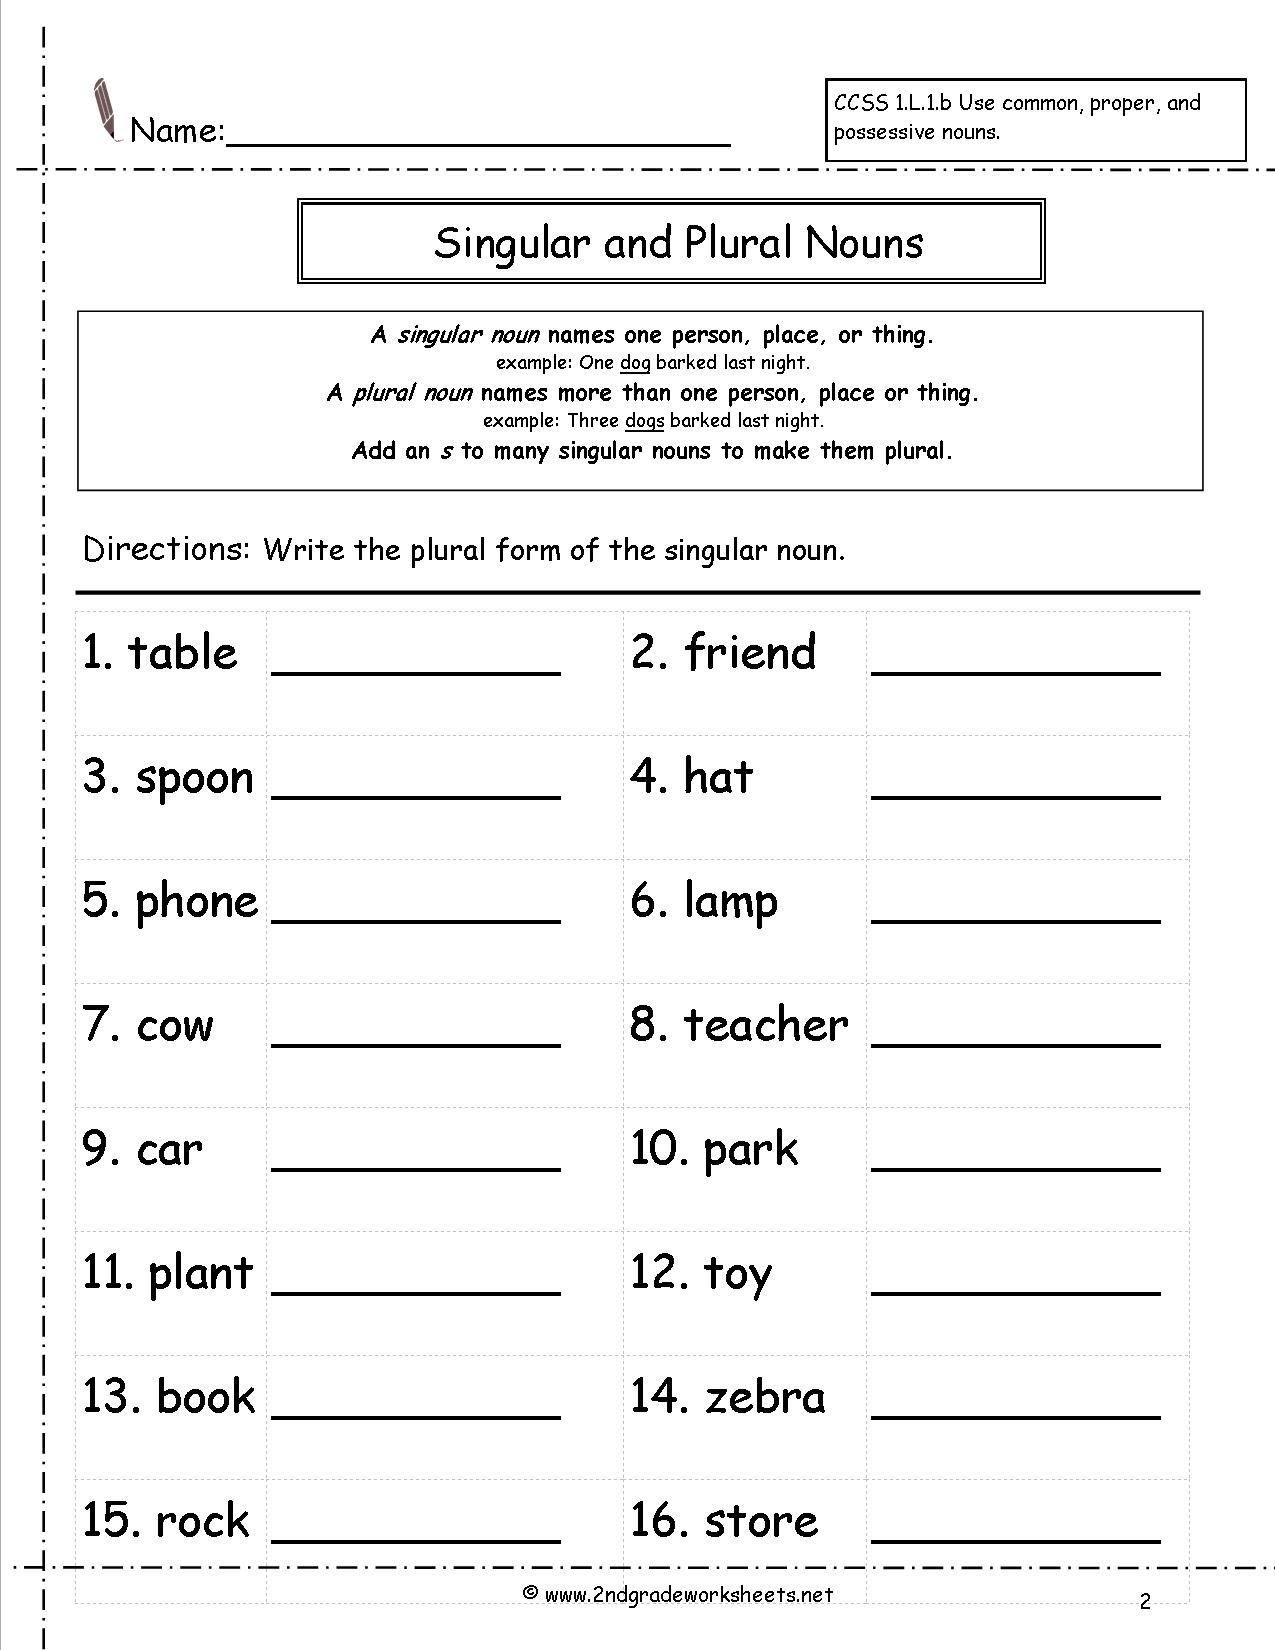 Singular And Plural Nouns Worksheets With Answers Pdf